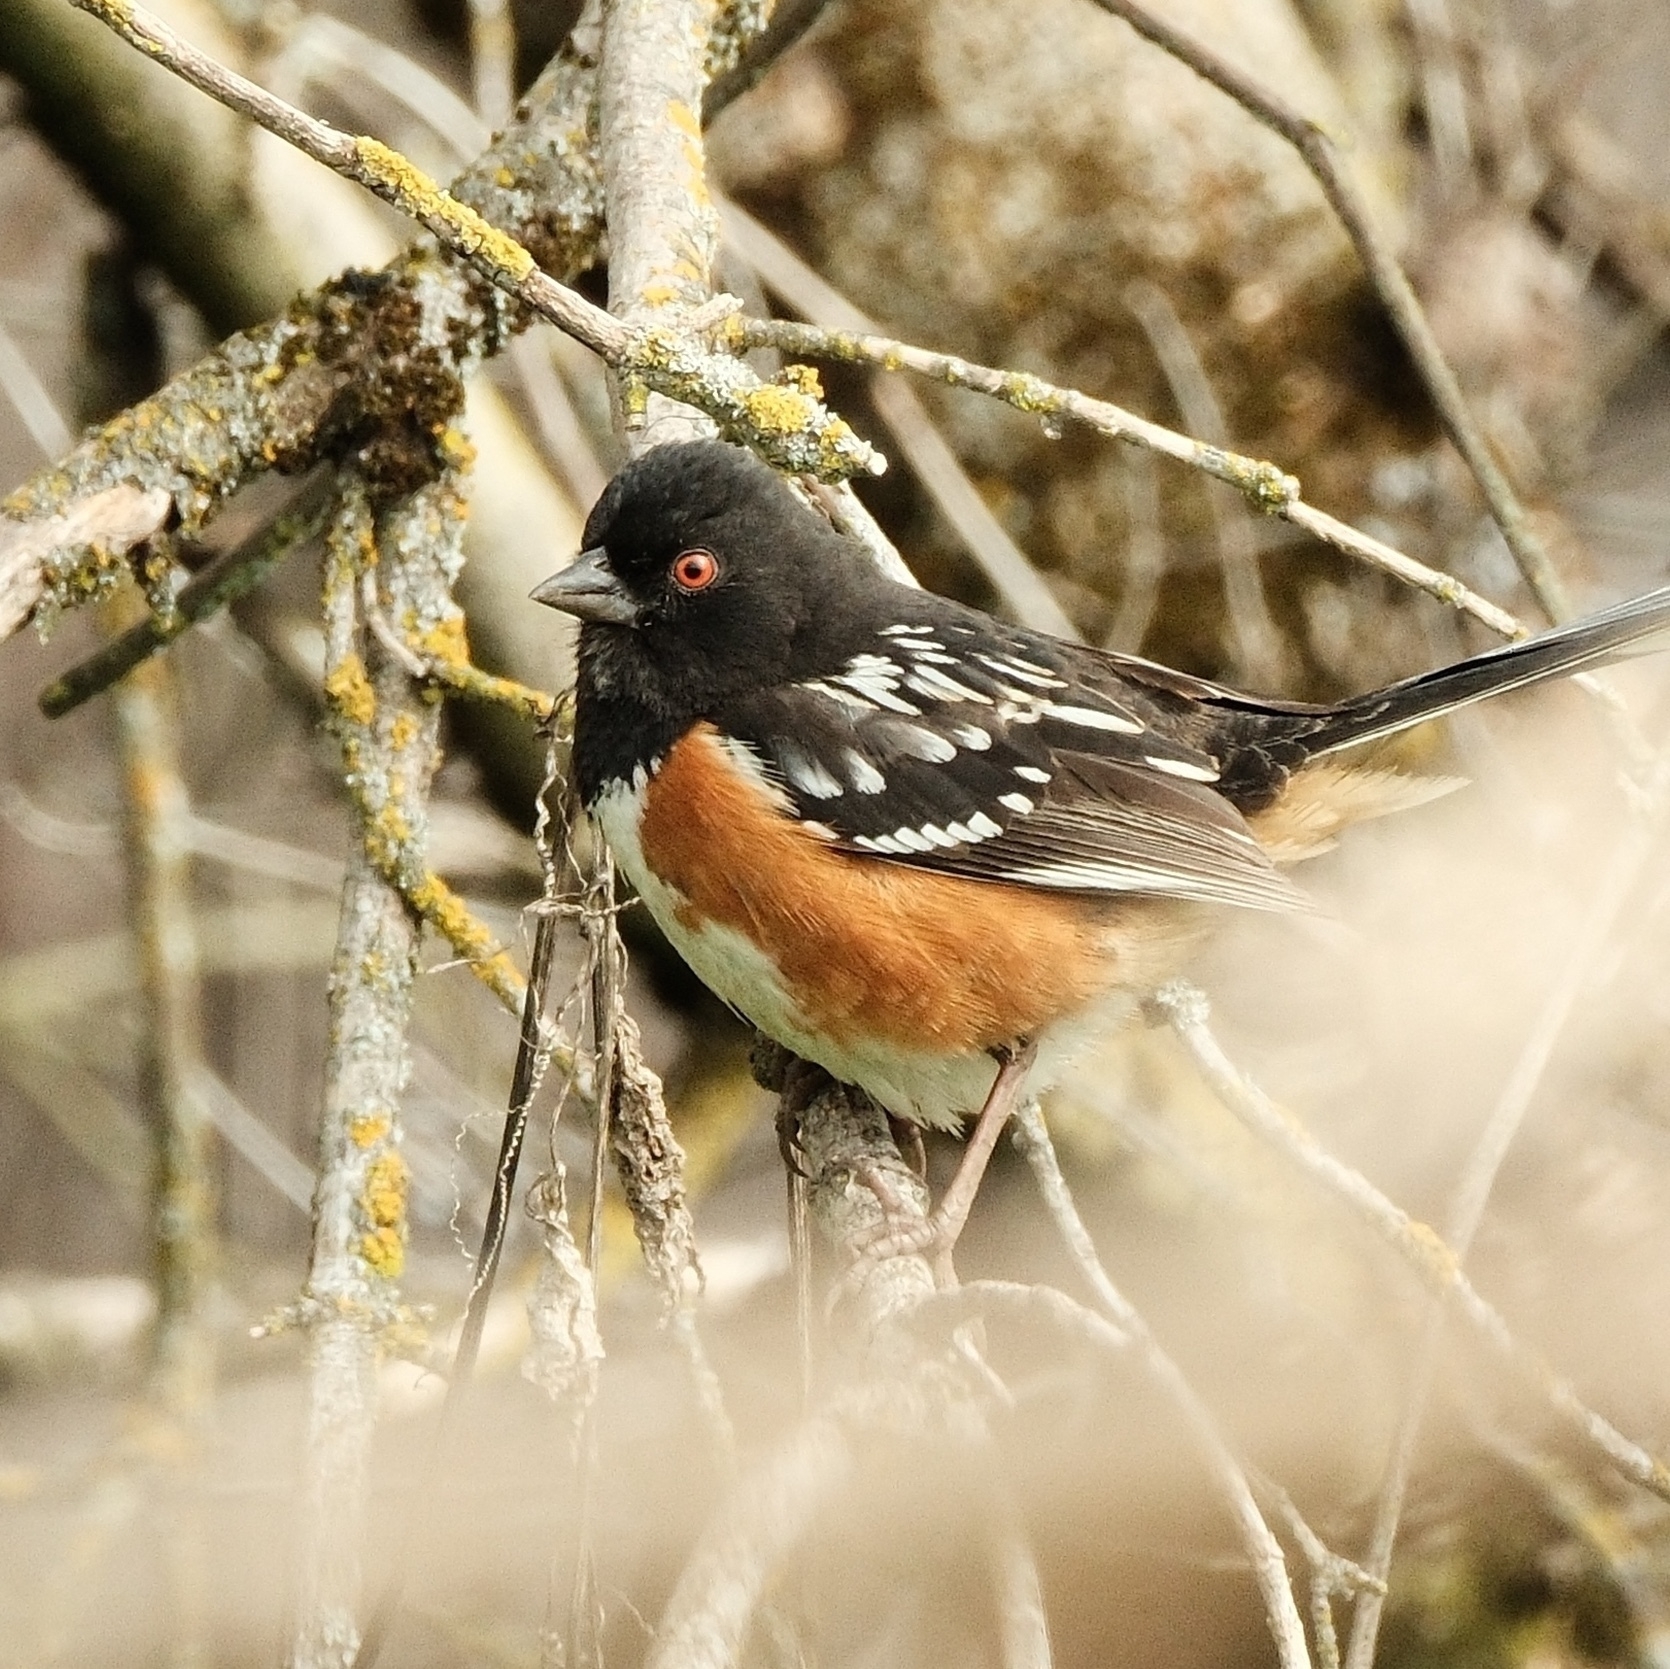 A black backed bird with white spots and a very rust red chest is perched upon a leafless plant with brush in the background. The bird has a gorgeous rust colored eye.